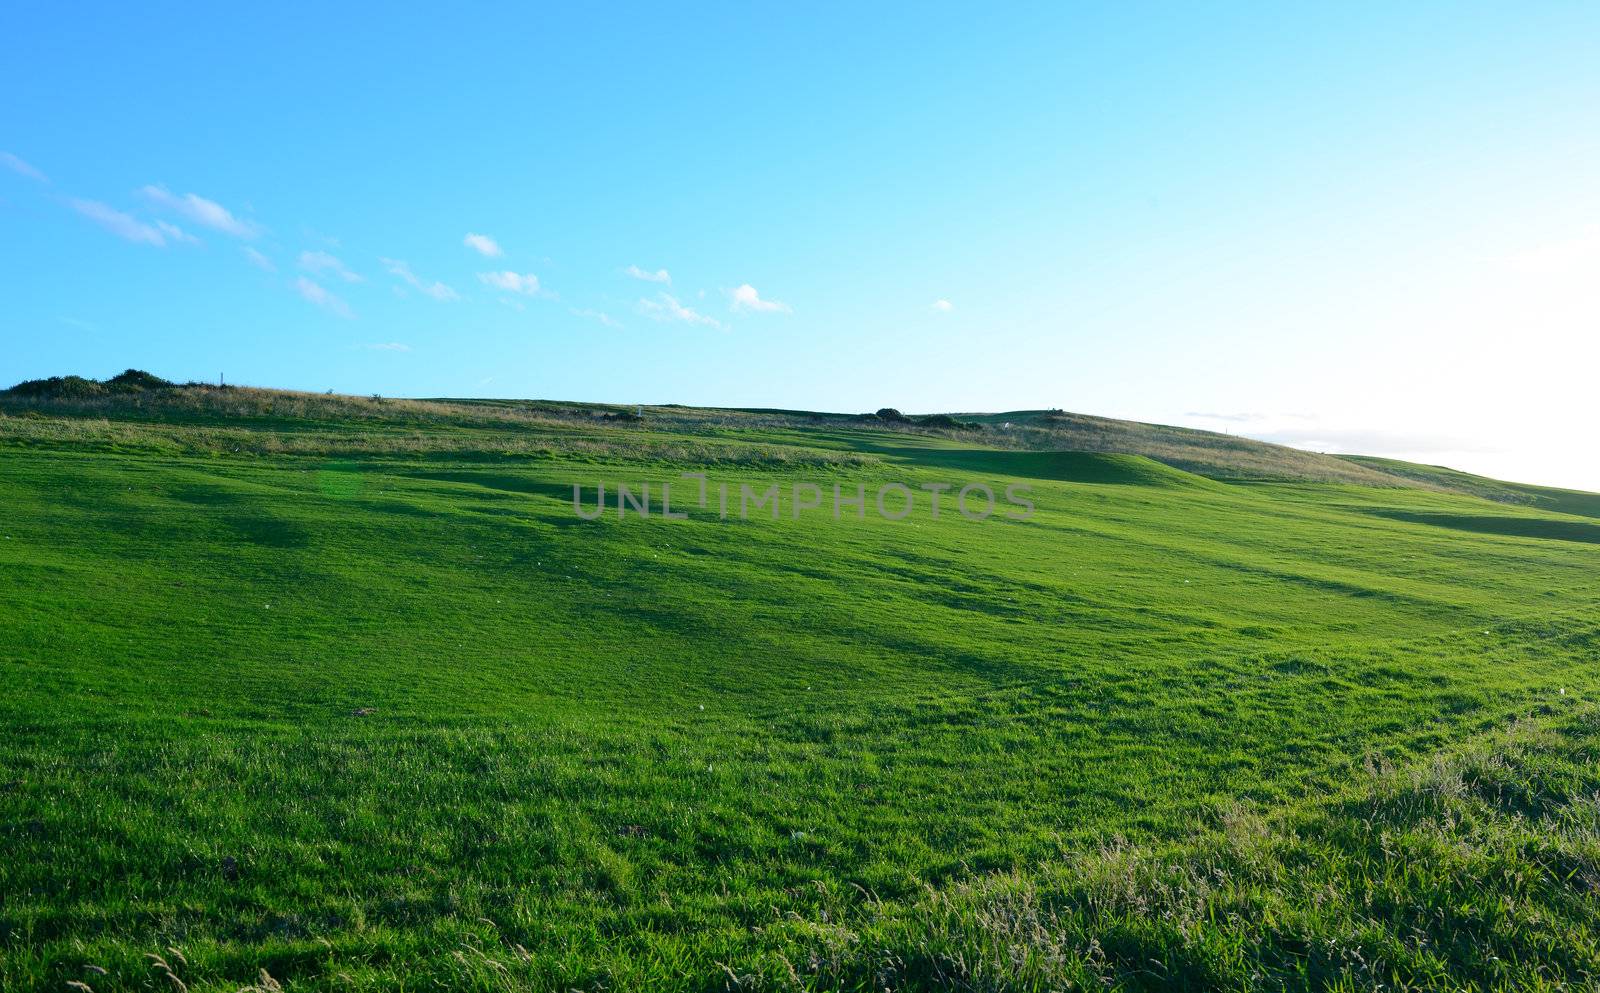 The very nice golf course fairway with blue sky background.